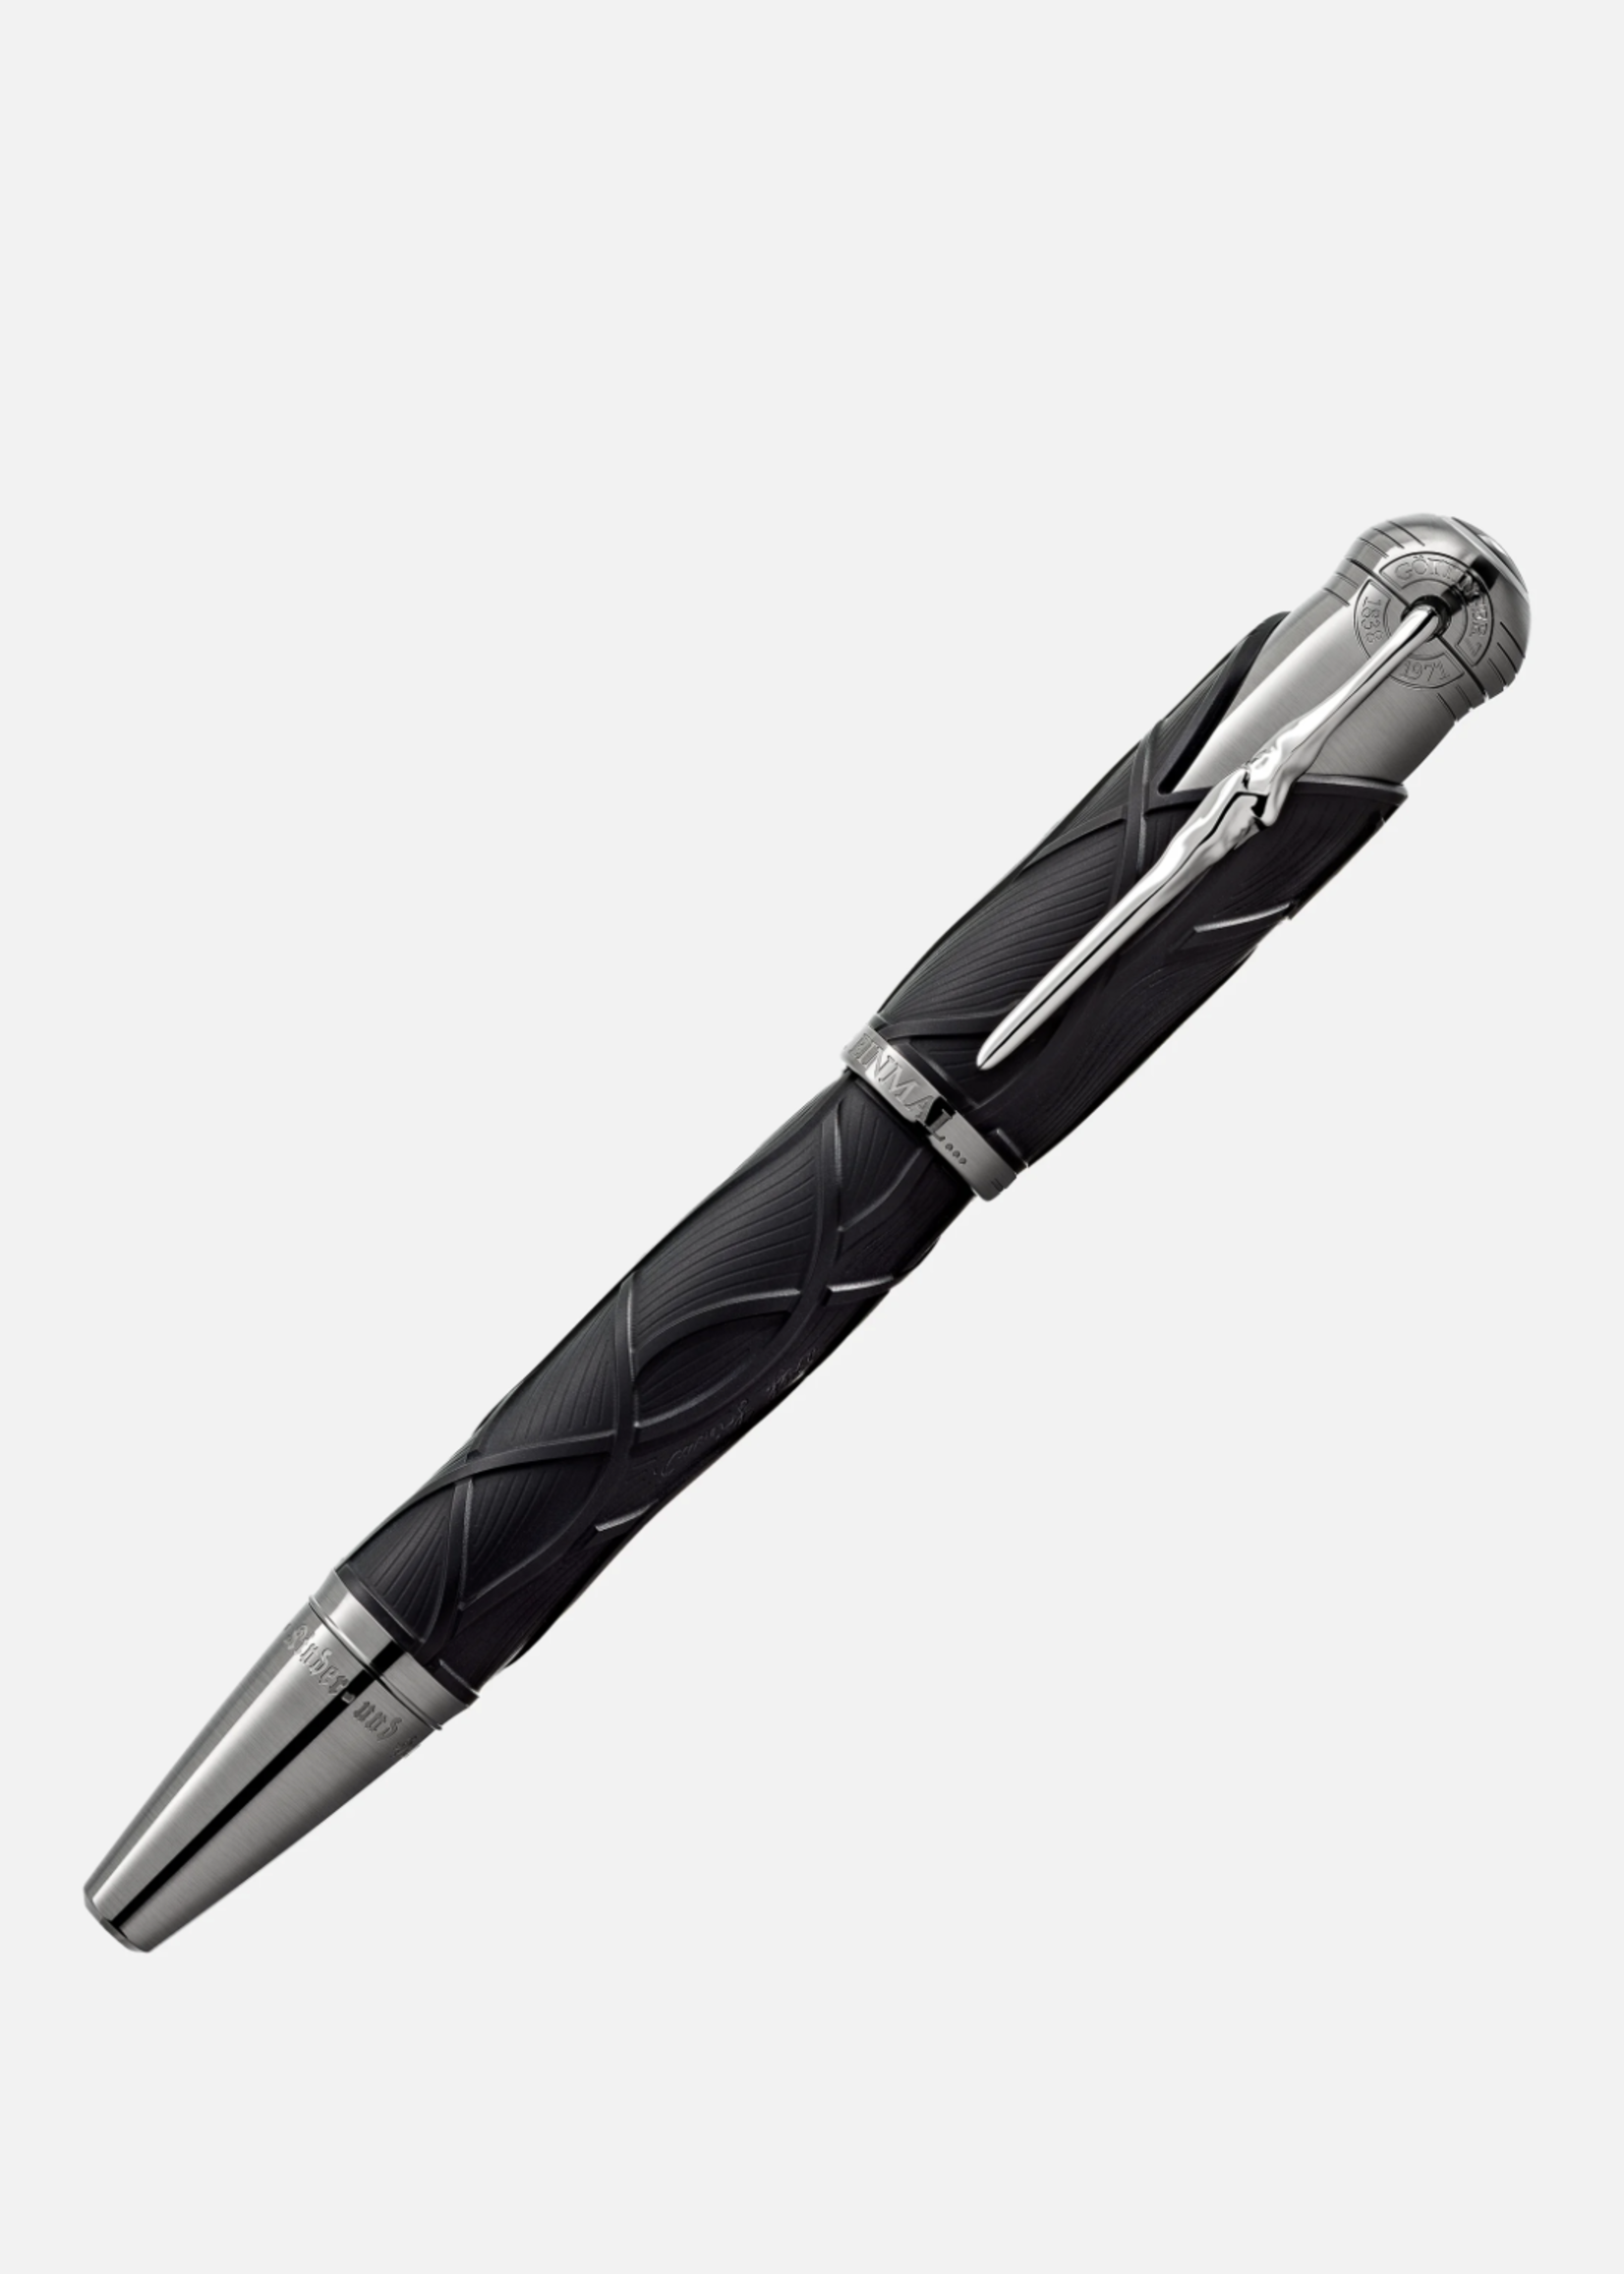 MONTBLANC Writers Edition Homage to Brothers Grimm Roller